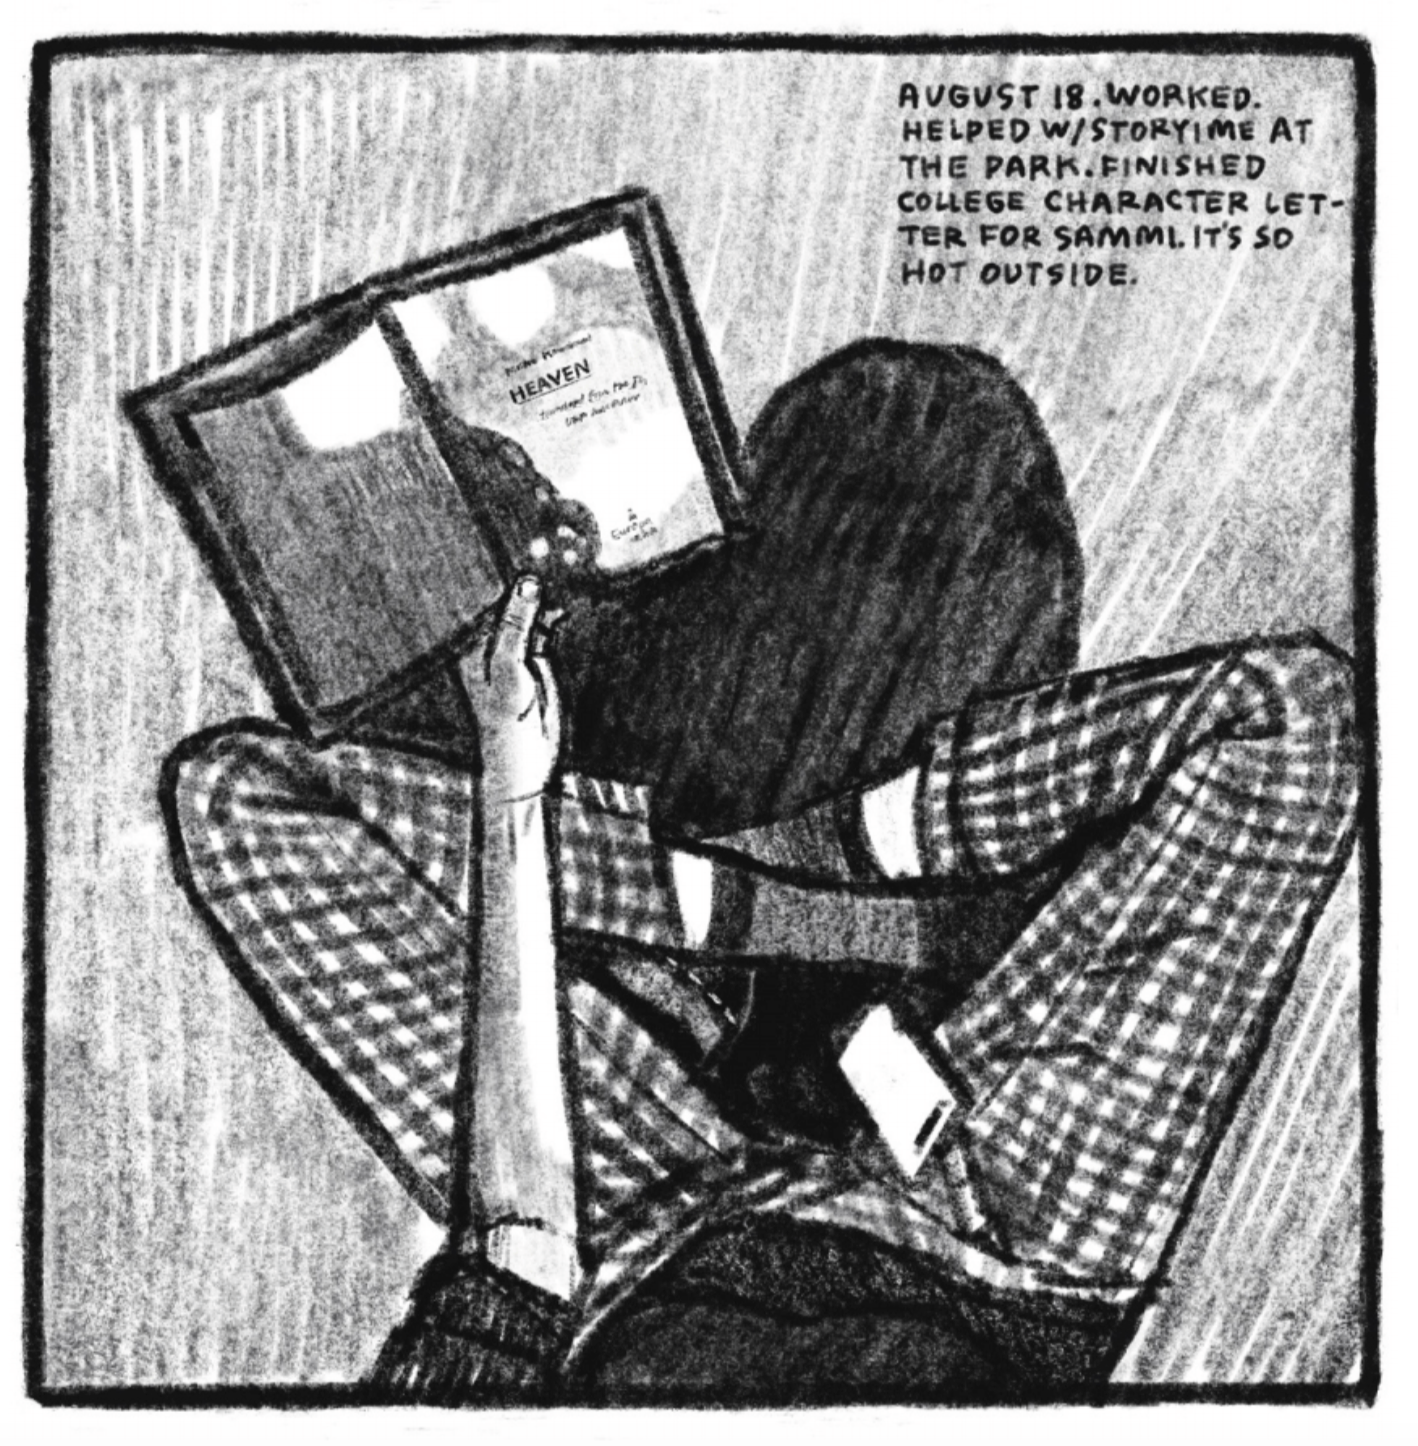 An aerial view of Kimâ€™s legs as she sits criss-cross on the floor. She is wearing checkered plaid pajama pants and quarter-length socks. She is holding an open book out in her left hand; the page reads â€œHEAVEN,â€ along with some other illegible text. Her phone is in her lap. â€œAugust 18. Worked. Helped with story time at the park. Finished college character letter for Sammi. Itâ€™s so hot outside.â€